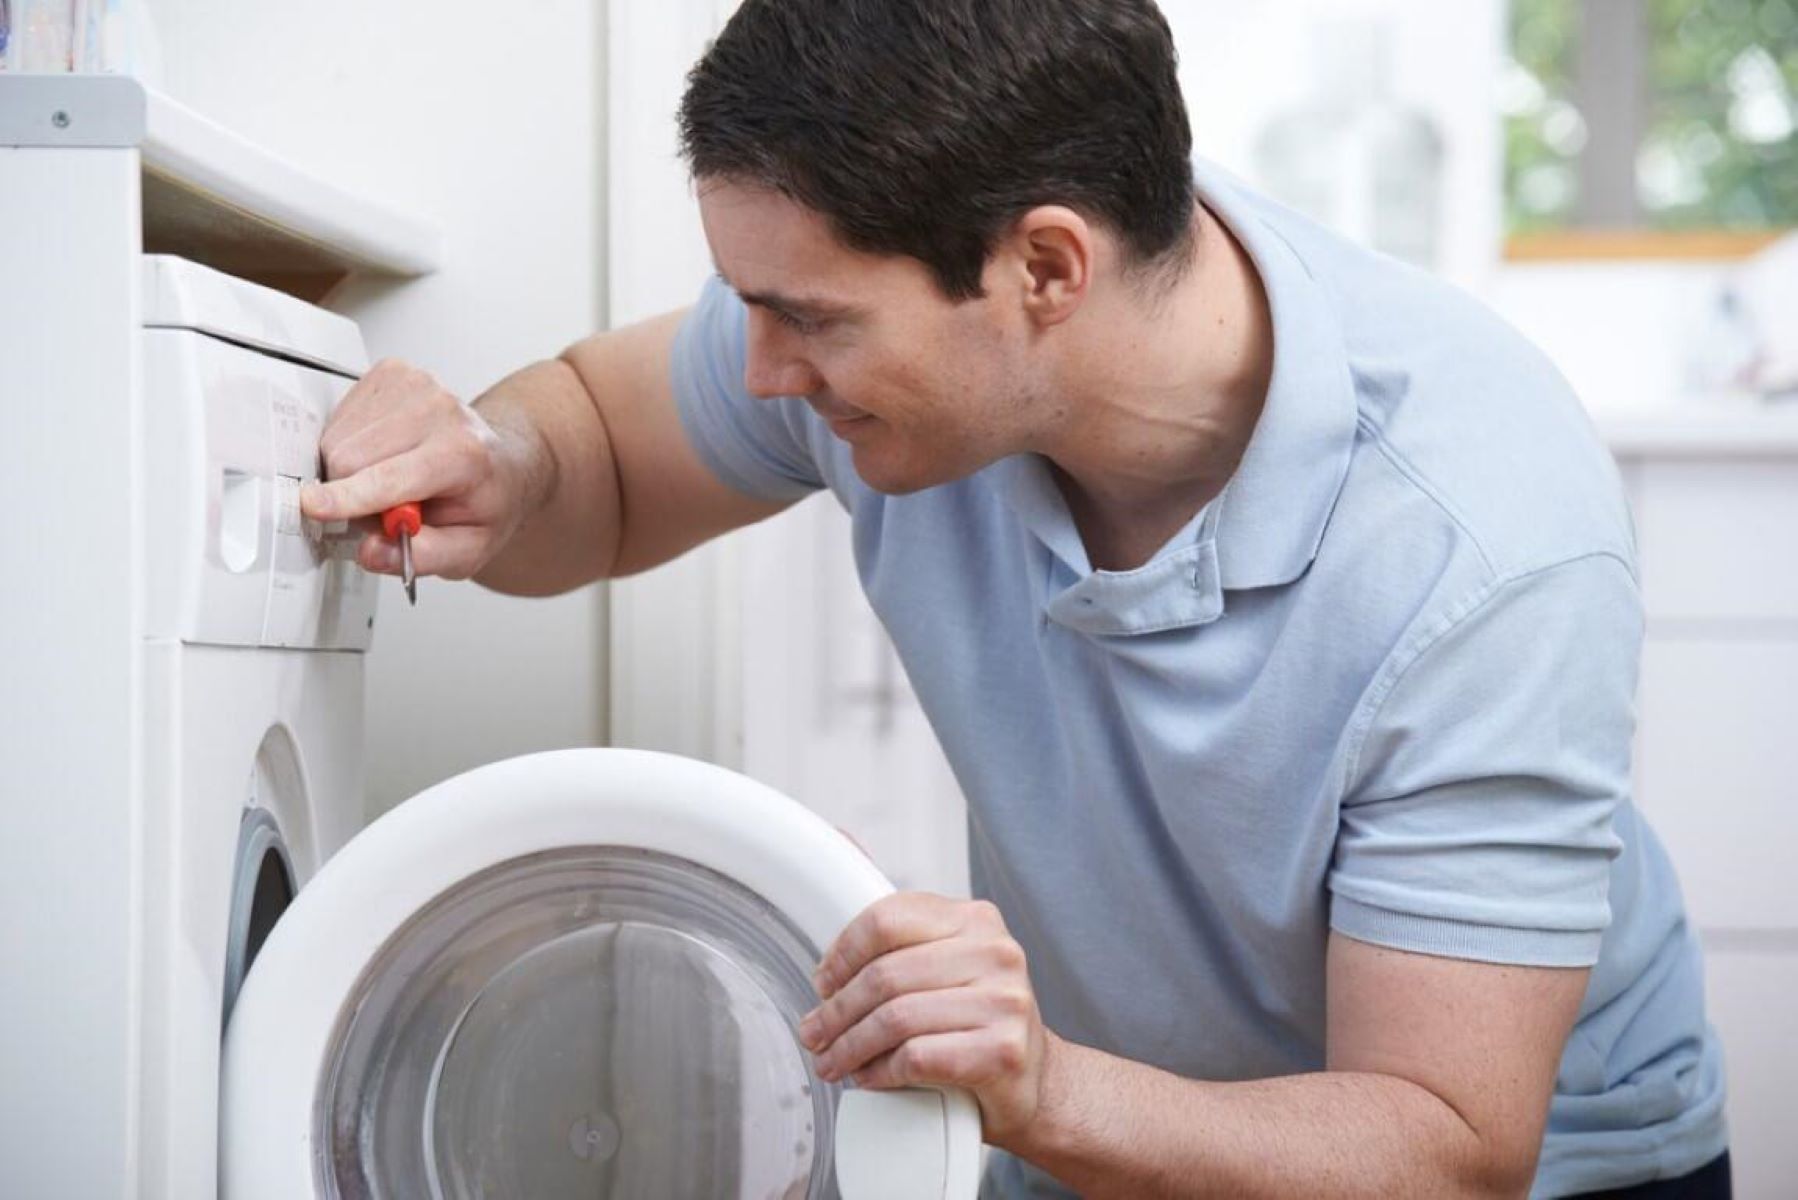 How To Fix The Error Code F04 For Whirlpool Dryer